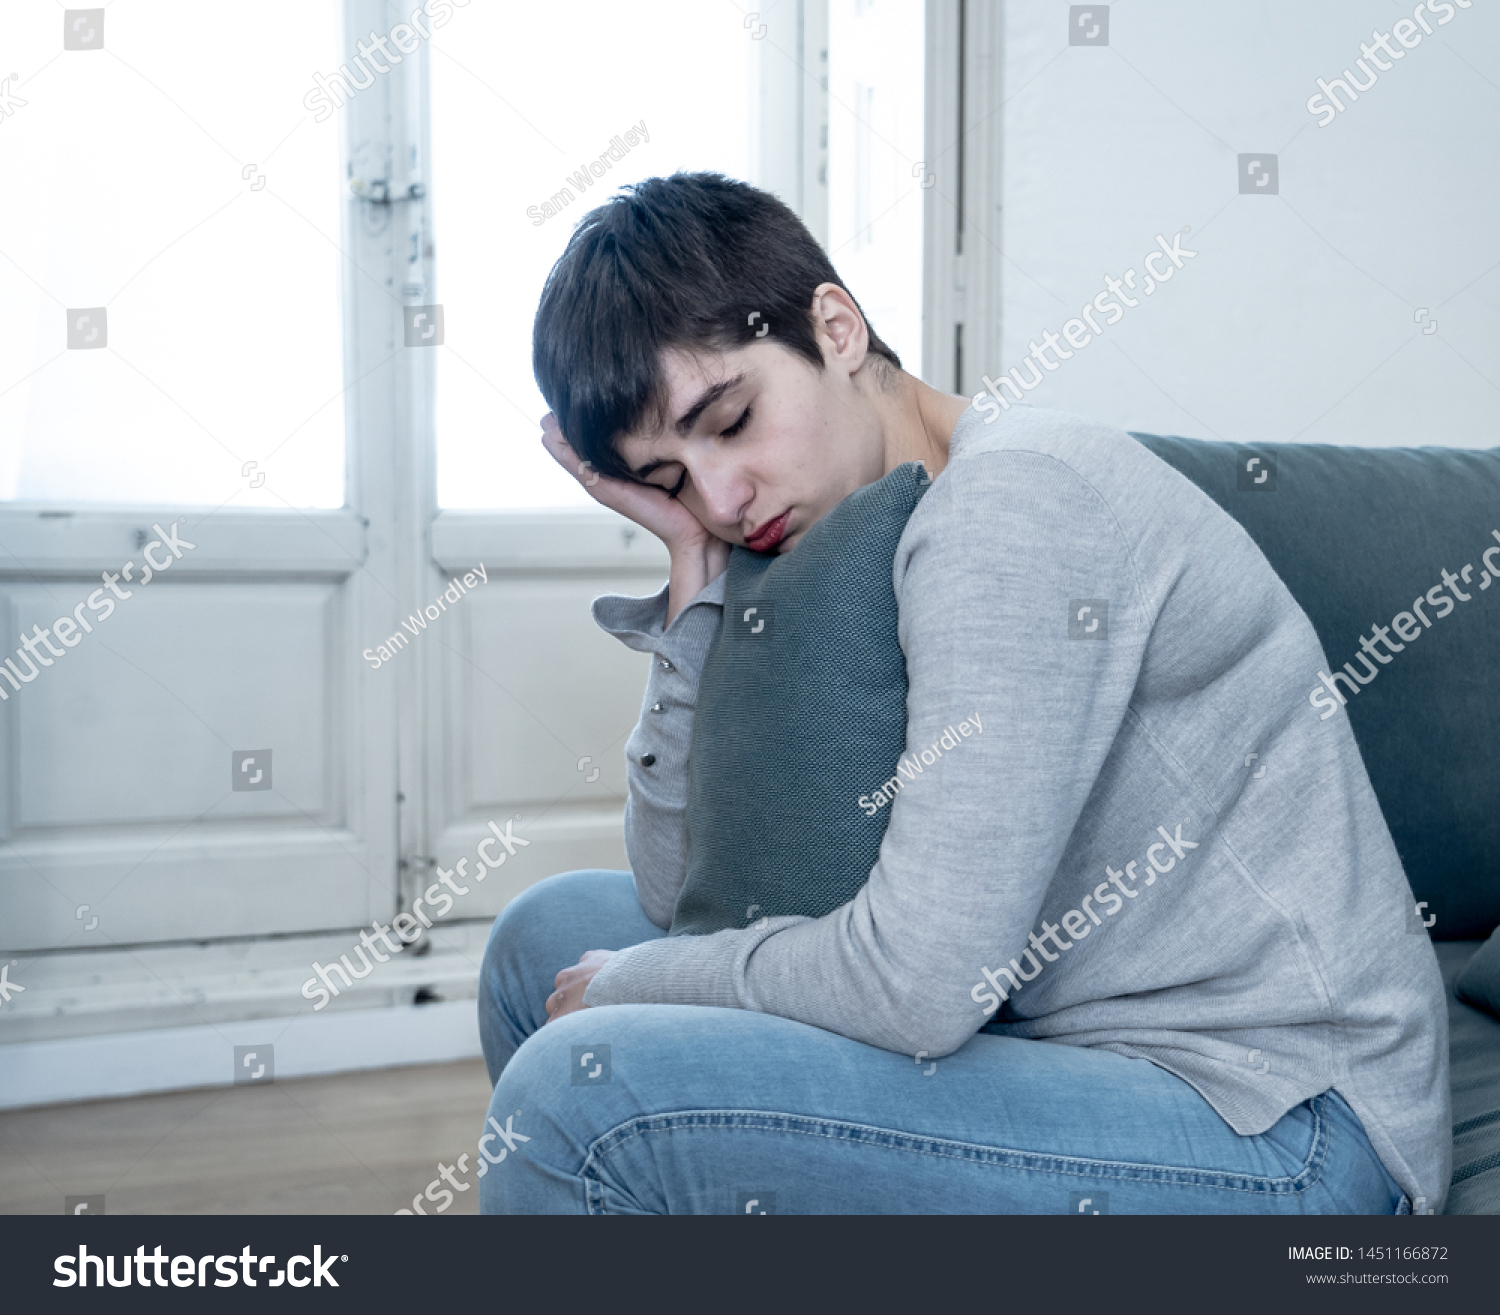 Beautiful desperate and depressed young woman on sofa feeling sad, hopeless and in pain suffering from Depression in People, Mental health,broken heart, Grief and Psychology concept. #1451166872